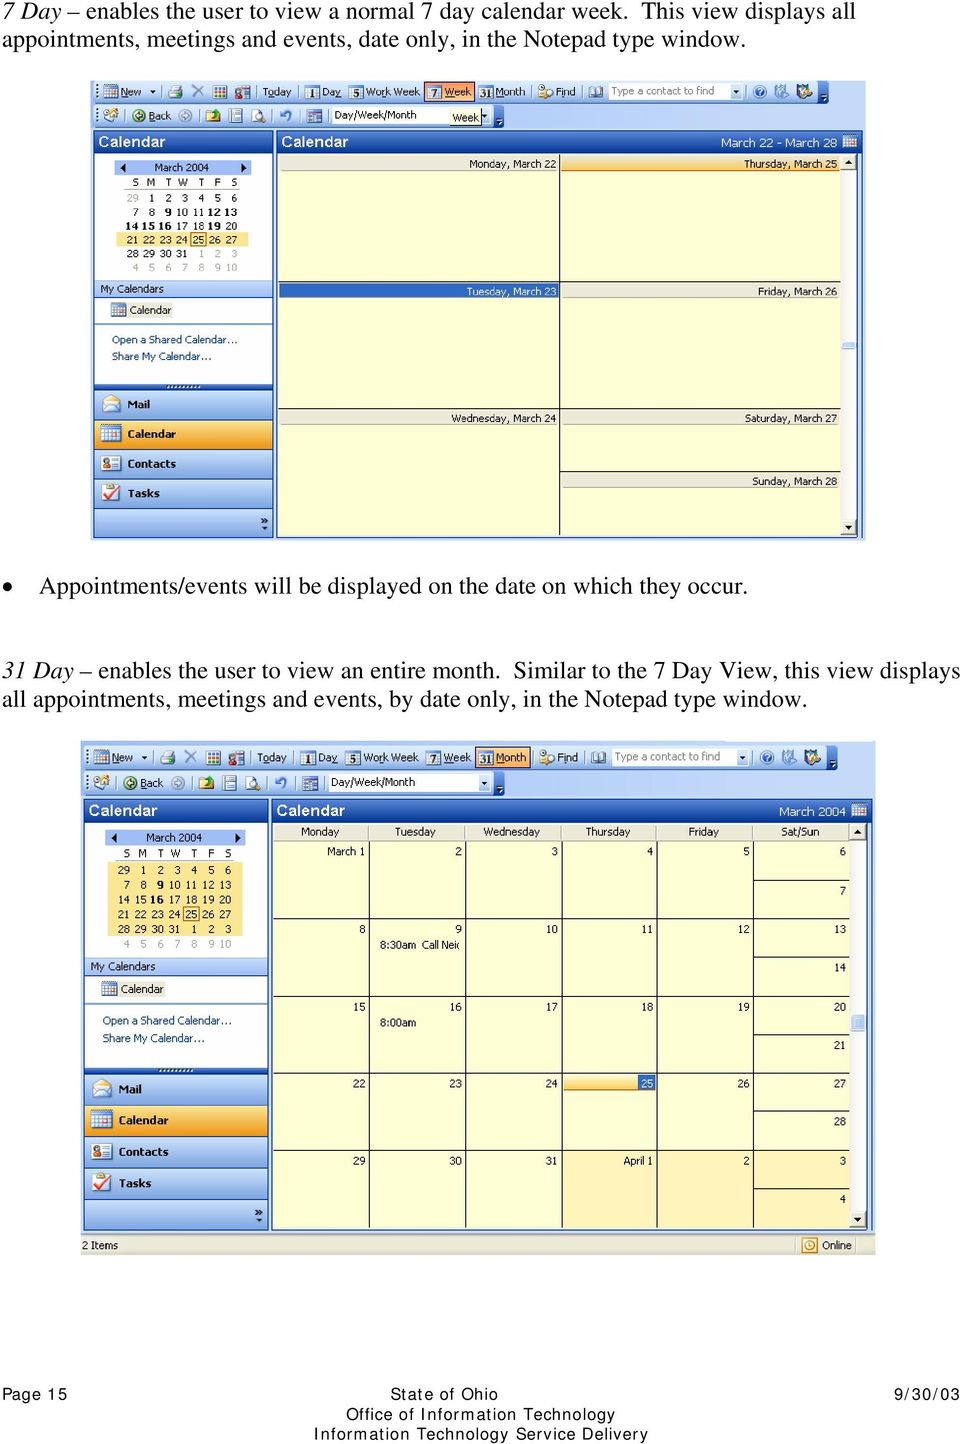 Appointments/events will be displayed on the date on which they occur.